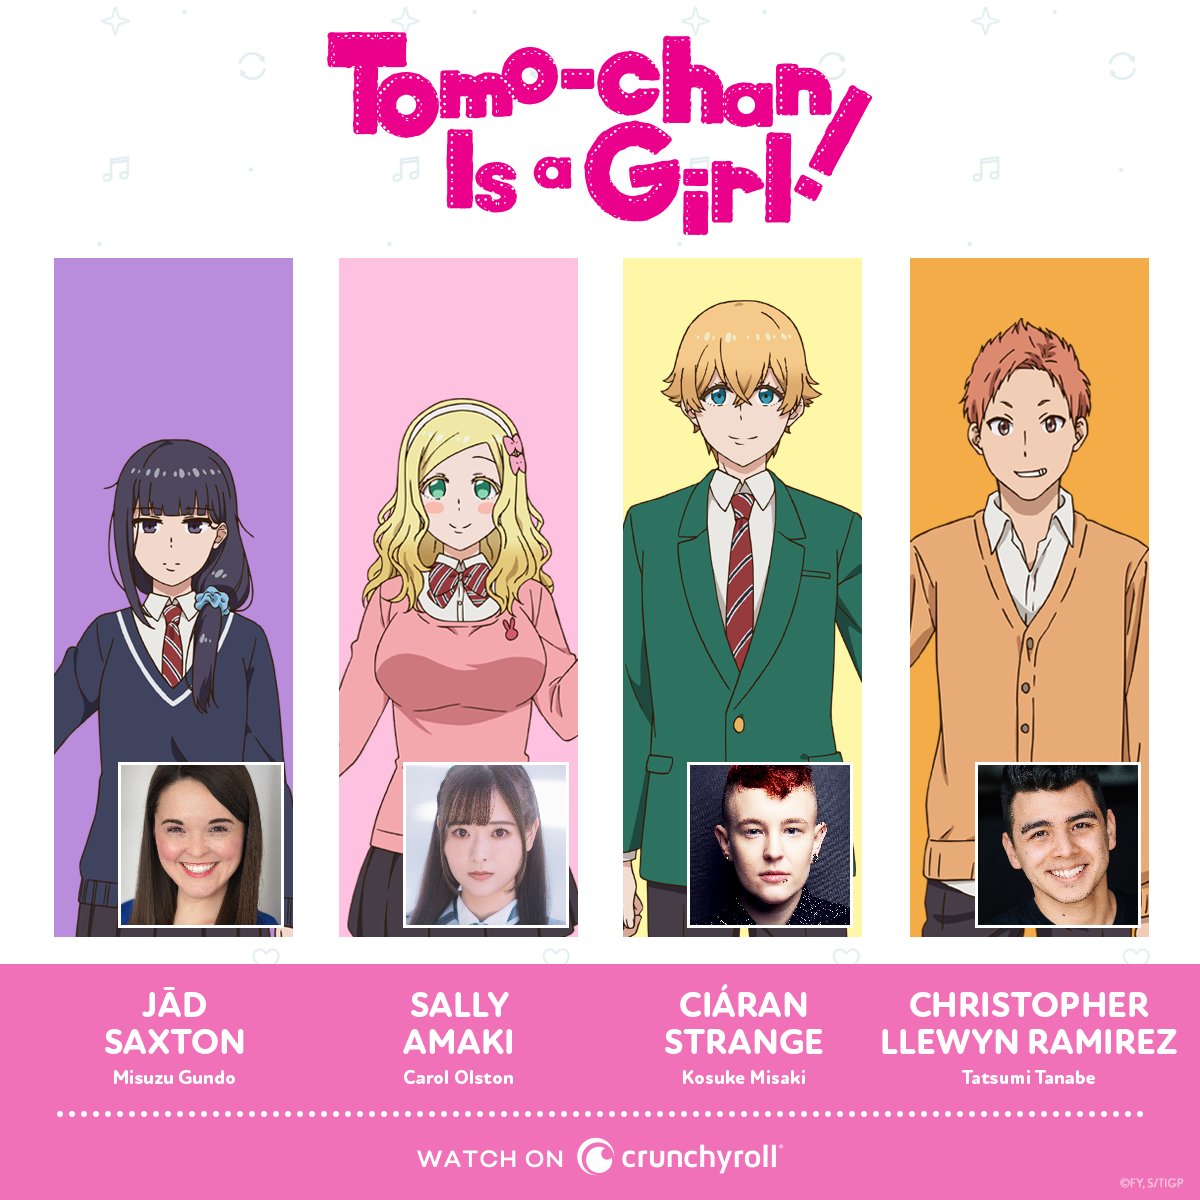 Stream episode EPISODE 144: Lexi Nieto - Voice of Tomo Aizawa from Tomo-chan  Is a Girl! by Spoiler Force Podcast podcast